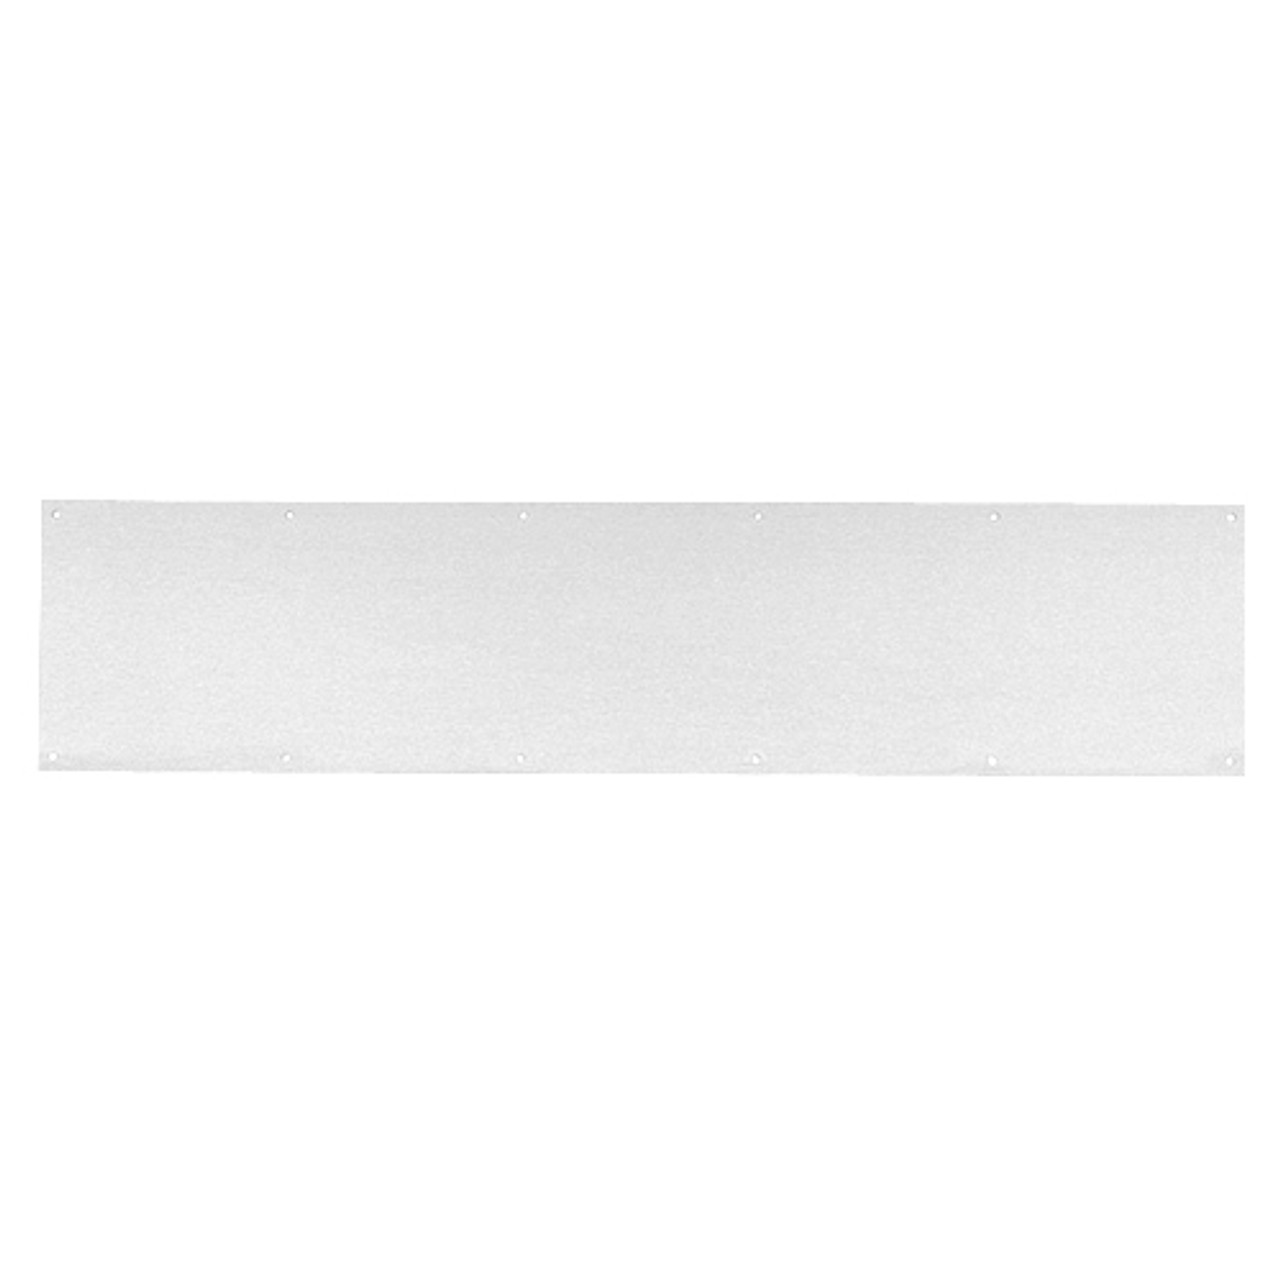 8400-US28-29.5x32-B-CS Ives 8400 Series Protection Plate in Aluminum